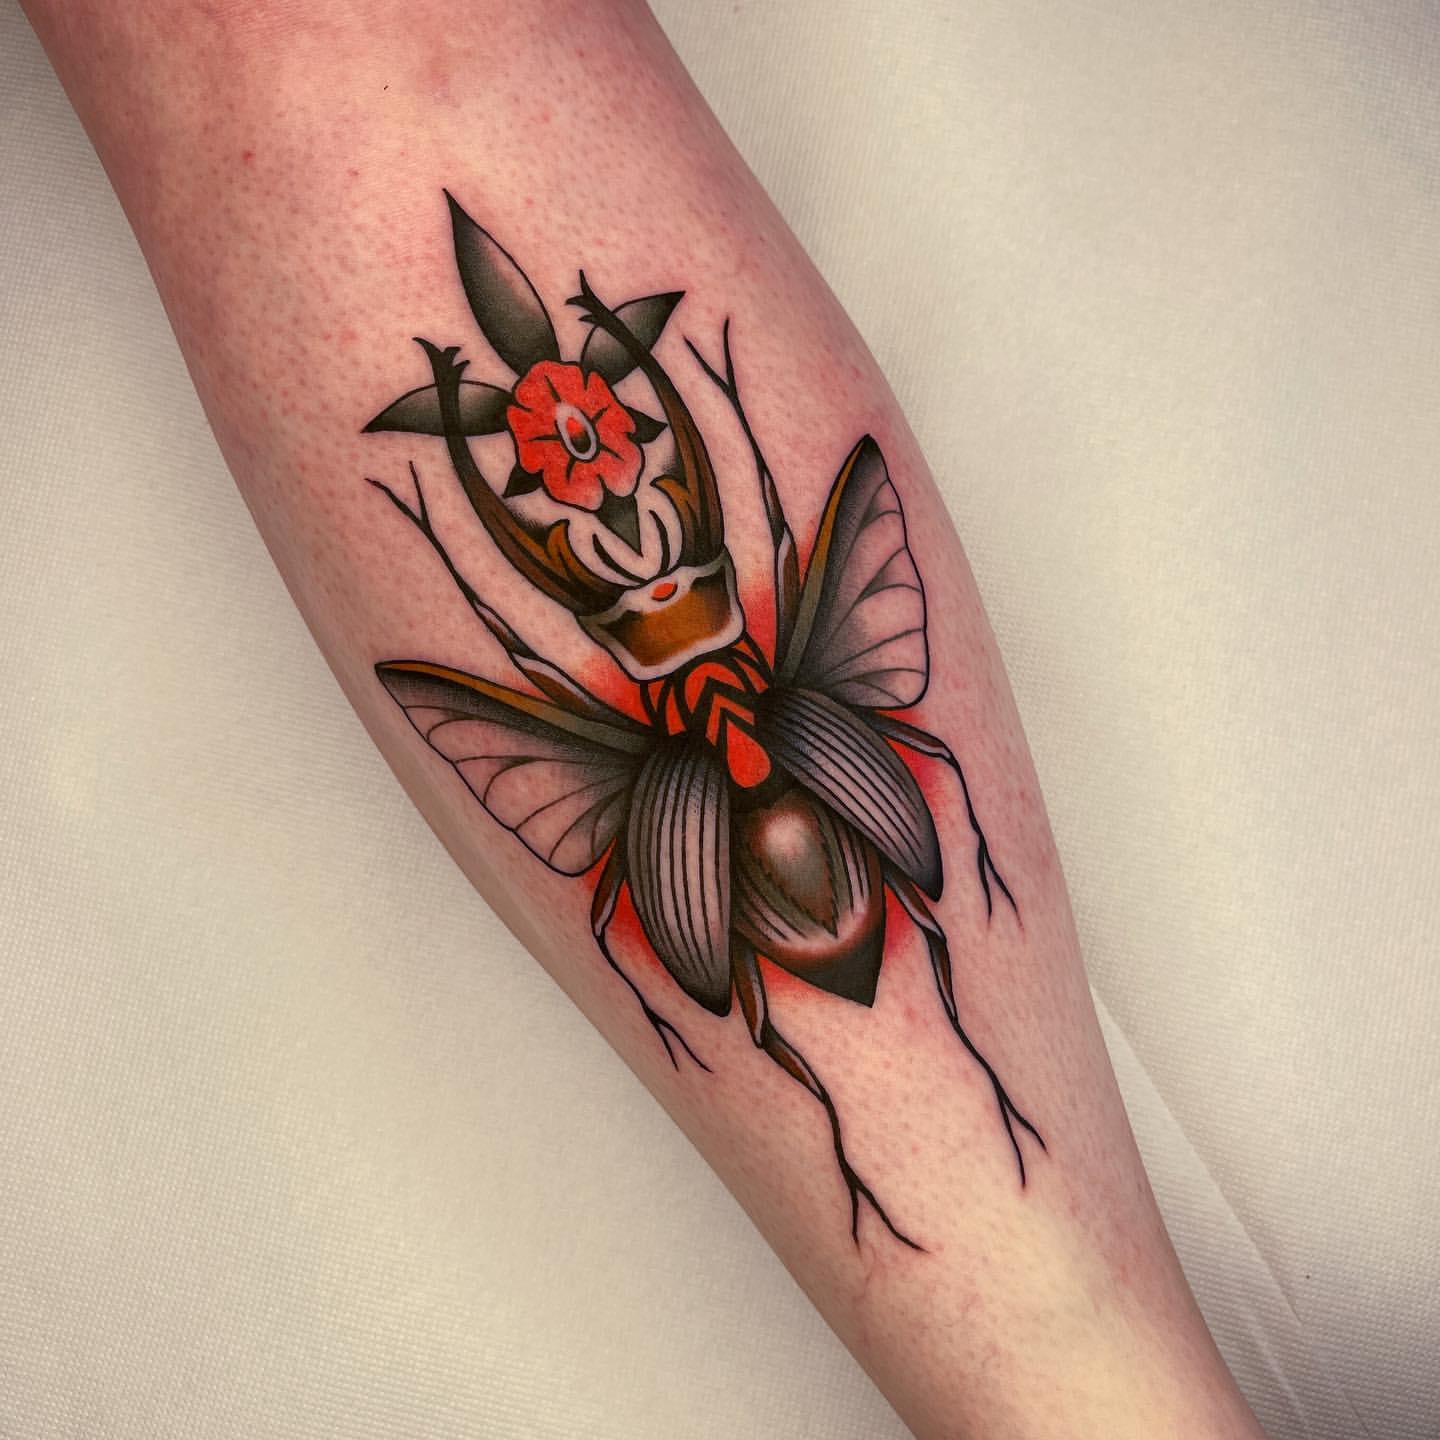 30 Incredibly Interesting Insect Tattoo Ideas for Men & Women in 2023